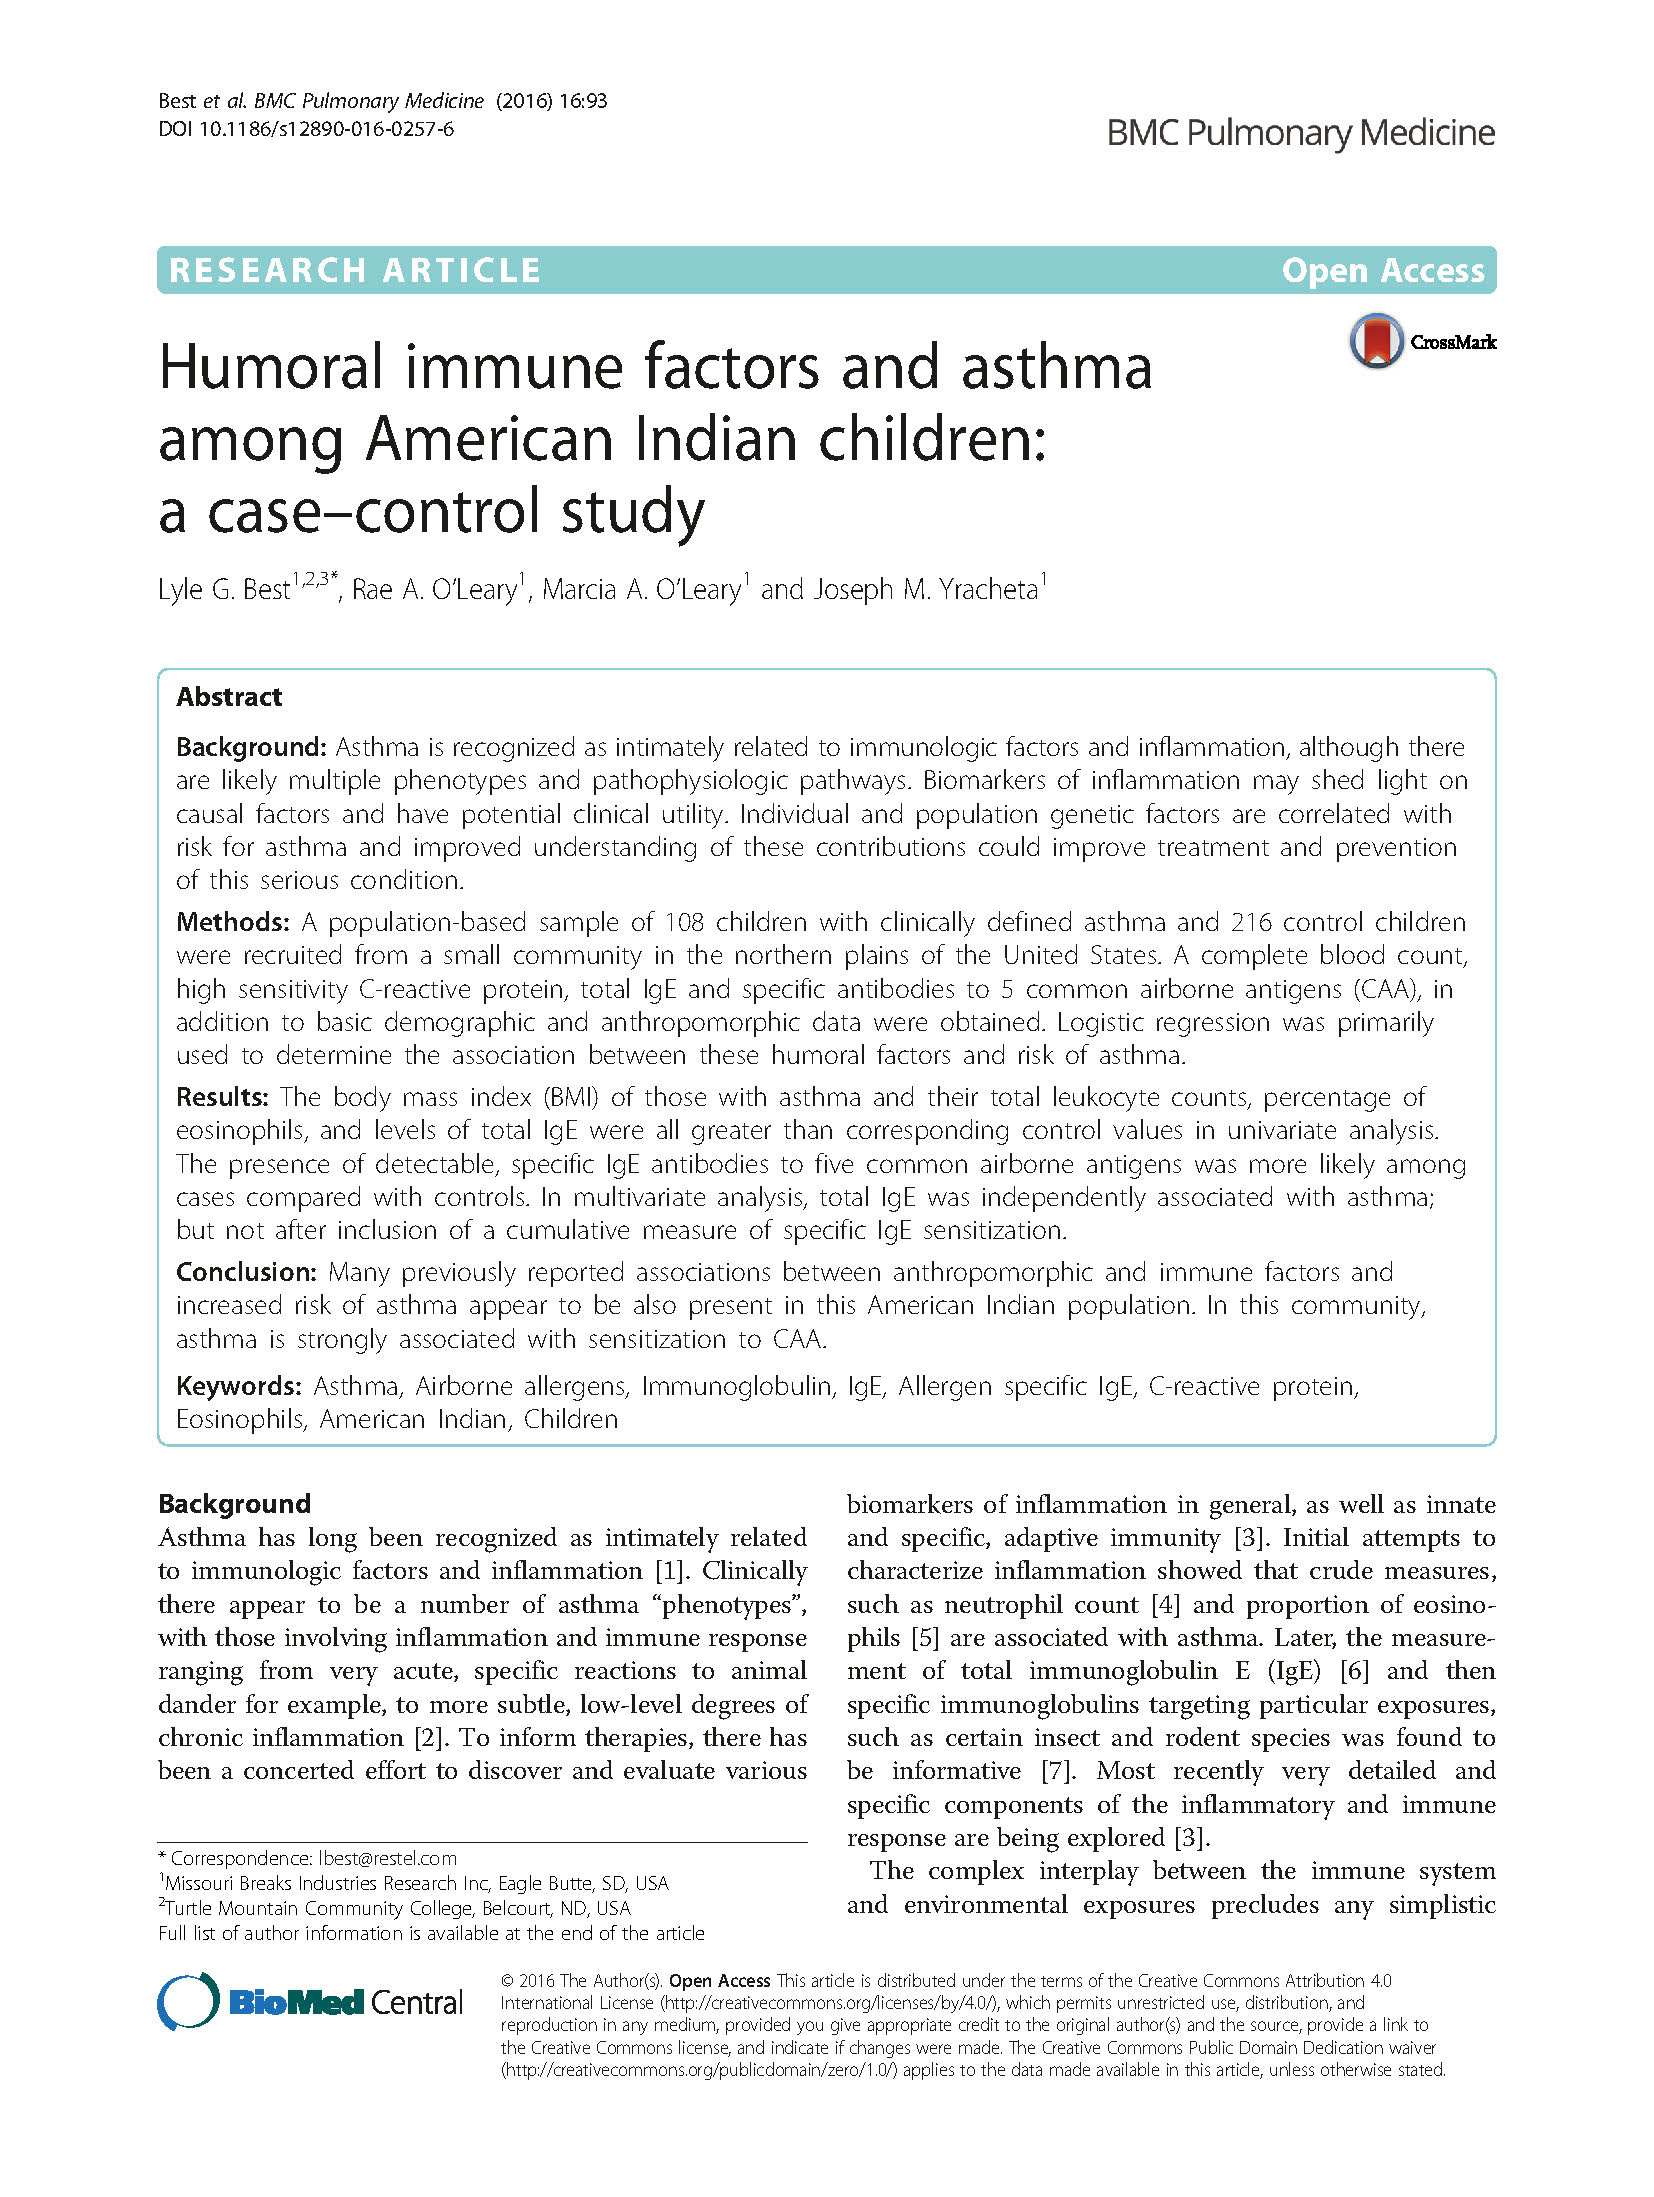 Pages from Best Humoral immune factors and asthma among American Indian children a case control study